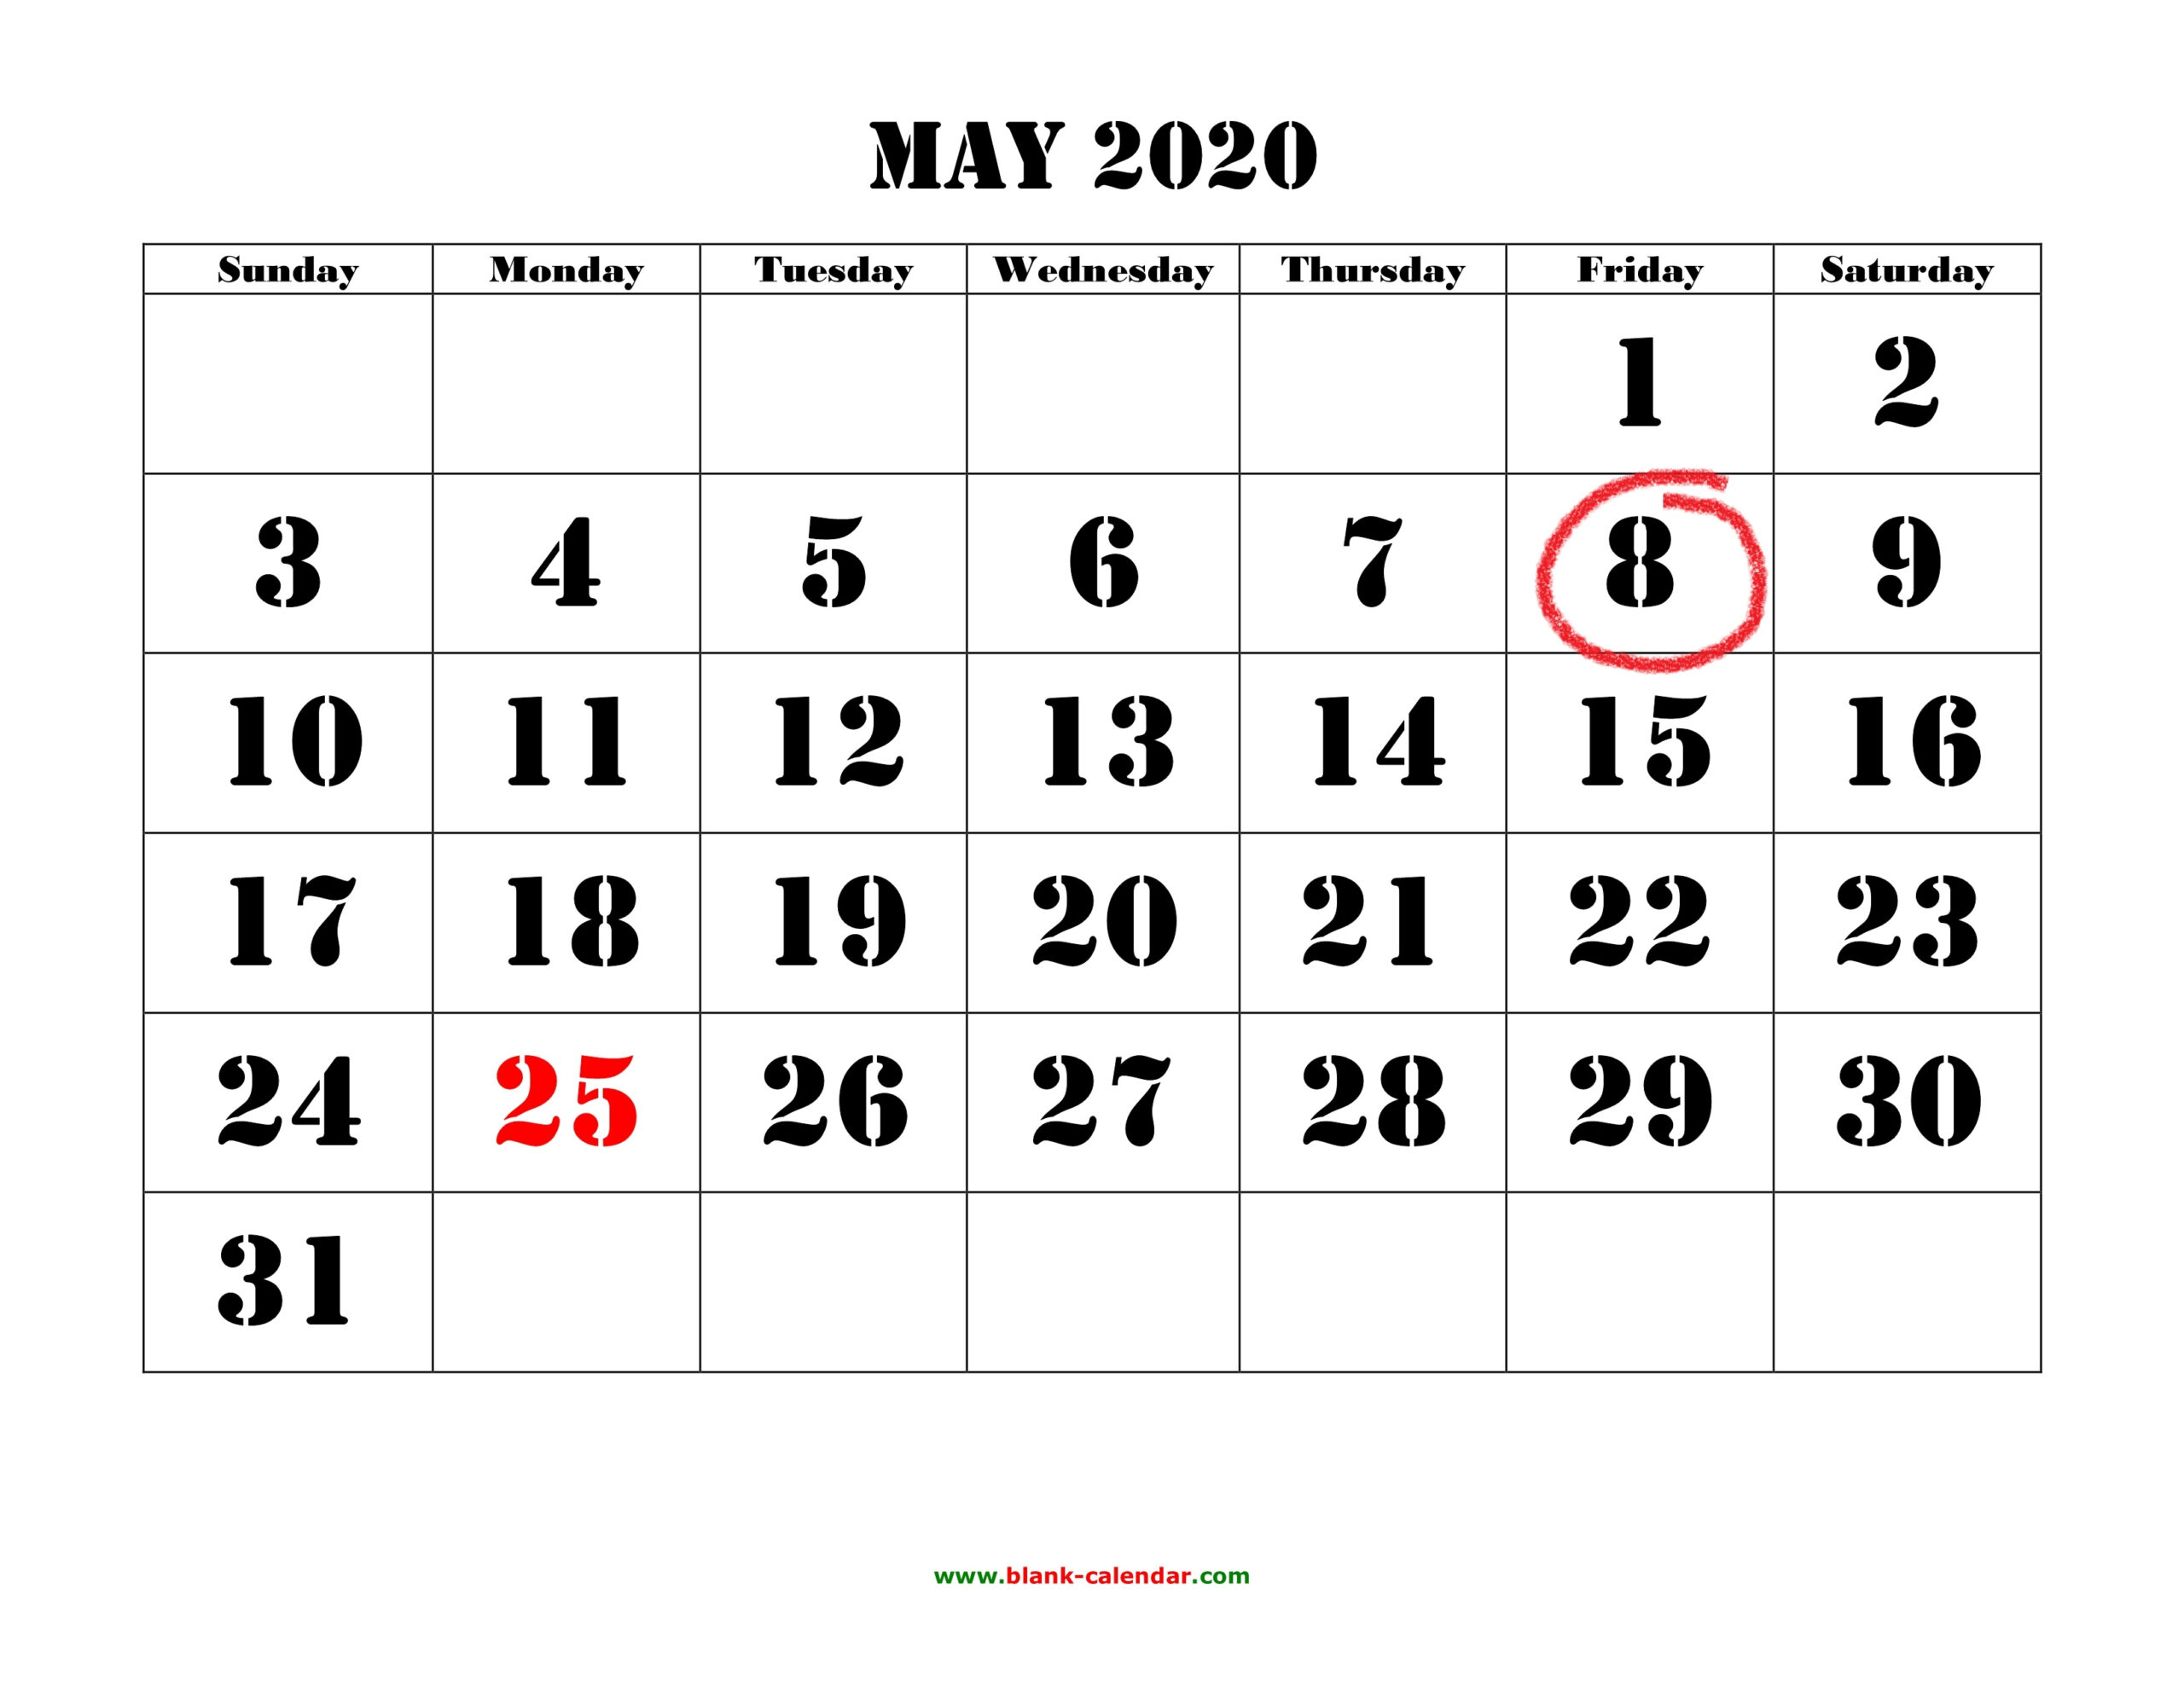 May Bank Holiday Changed 2020 - Stanburn Primary School